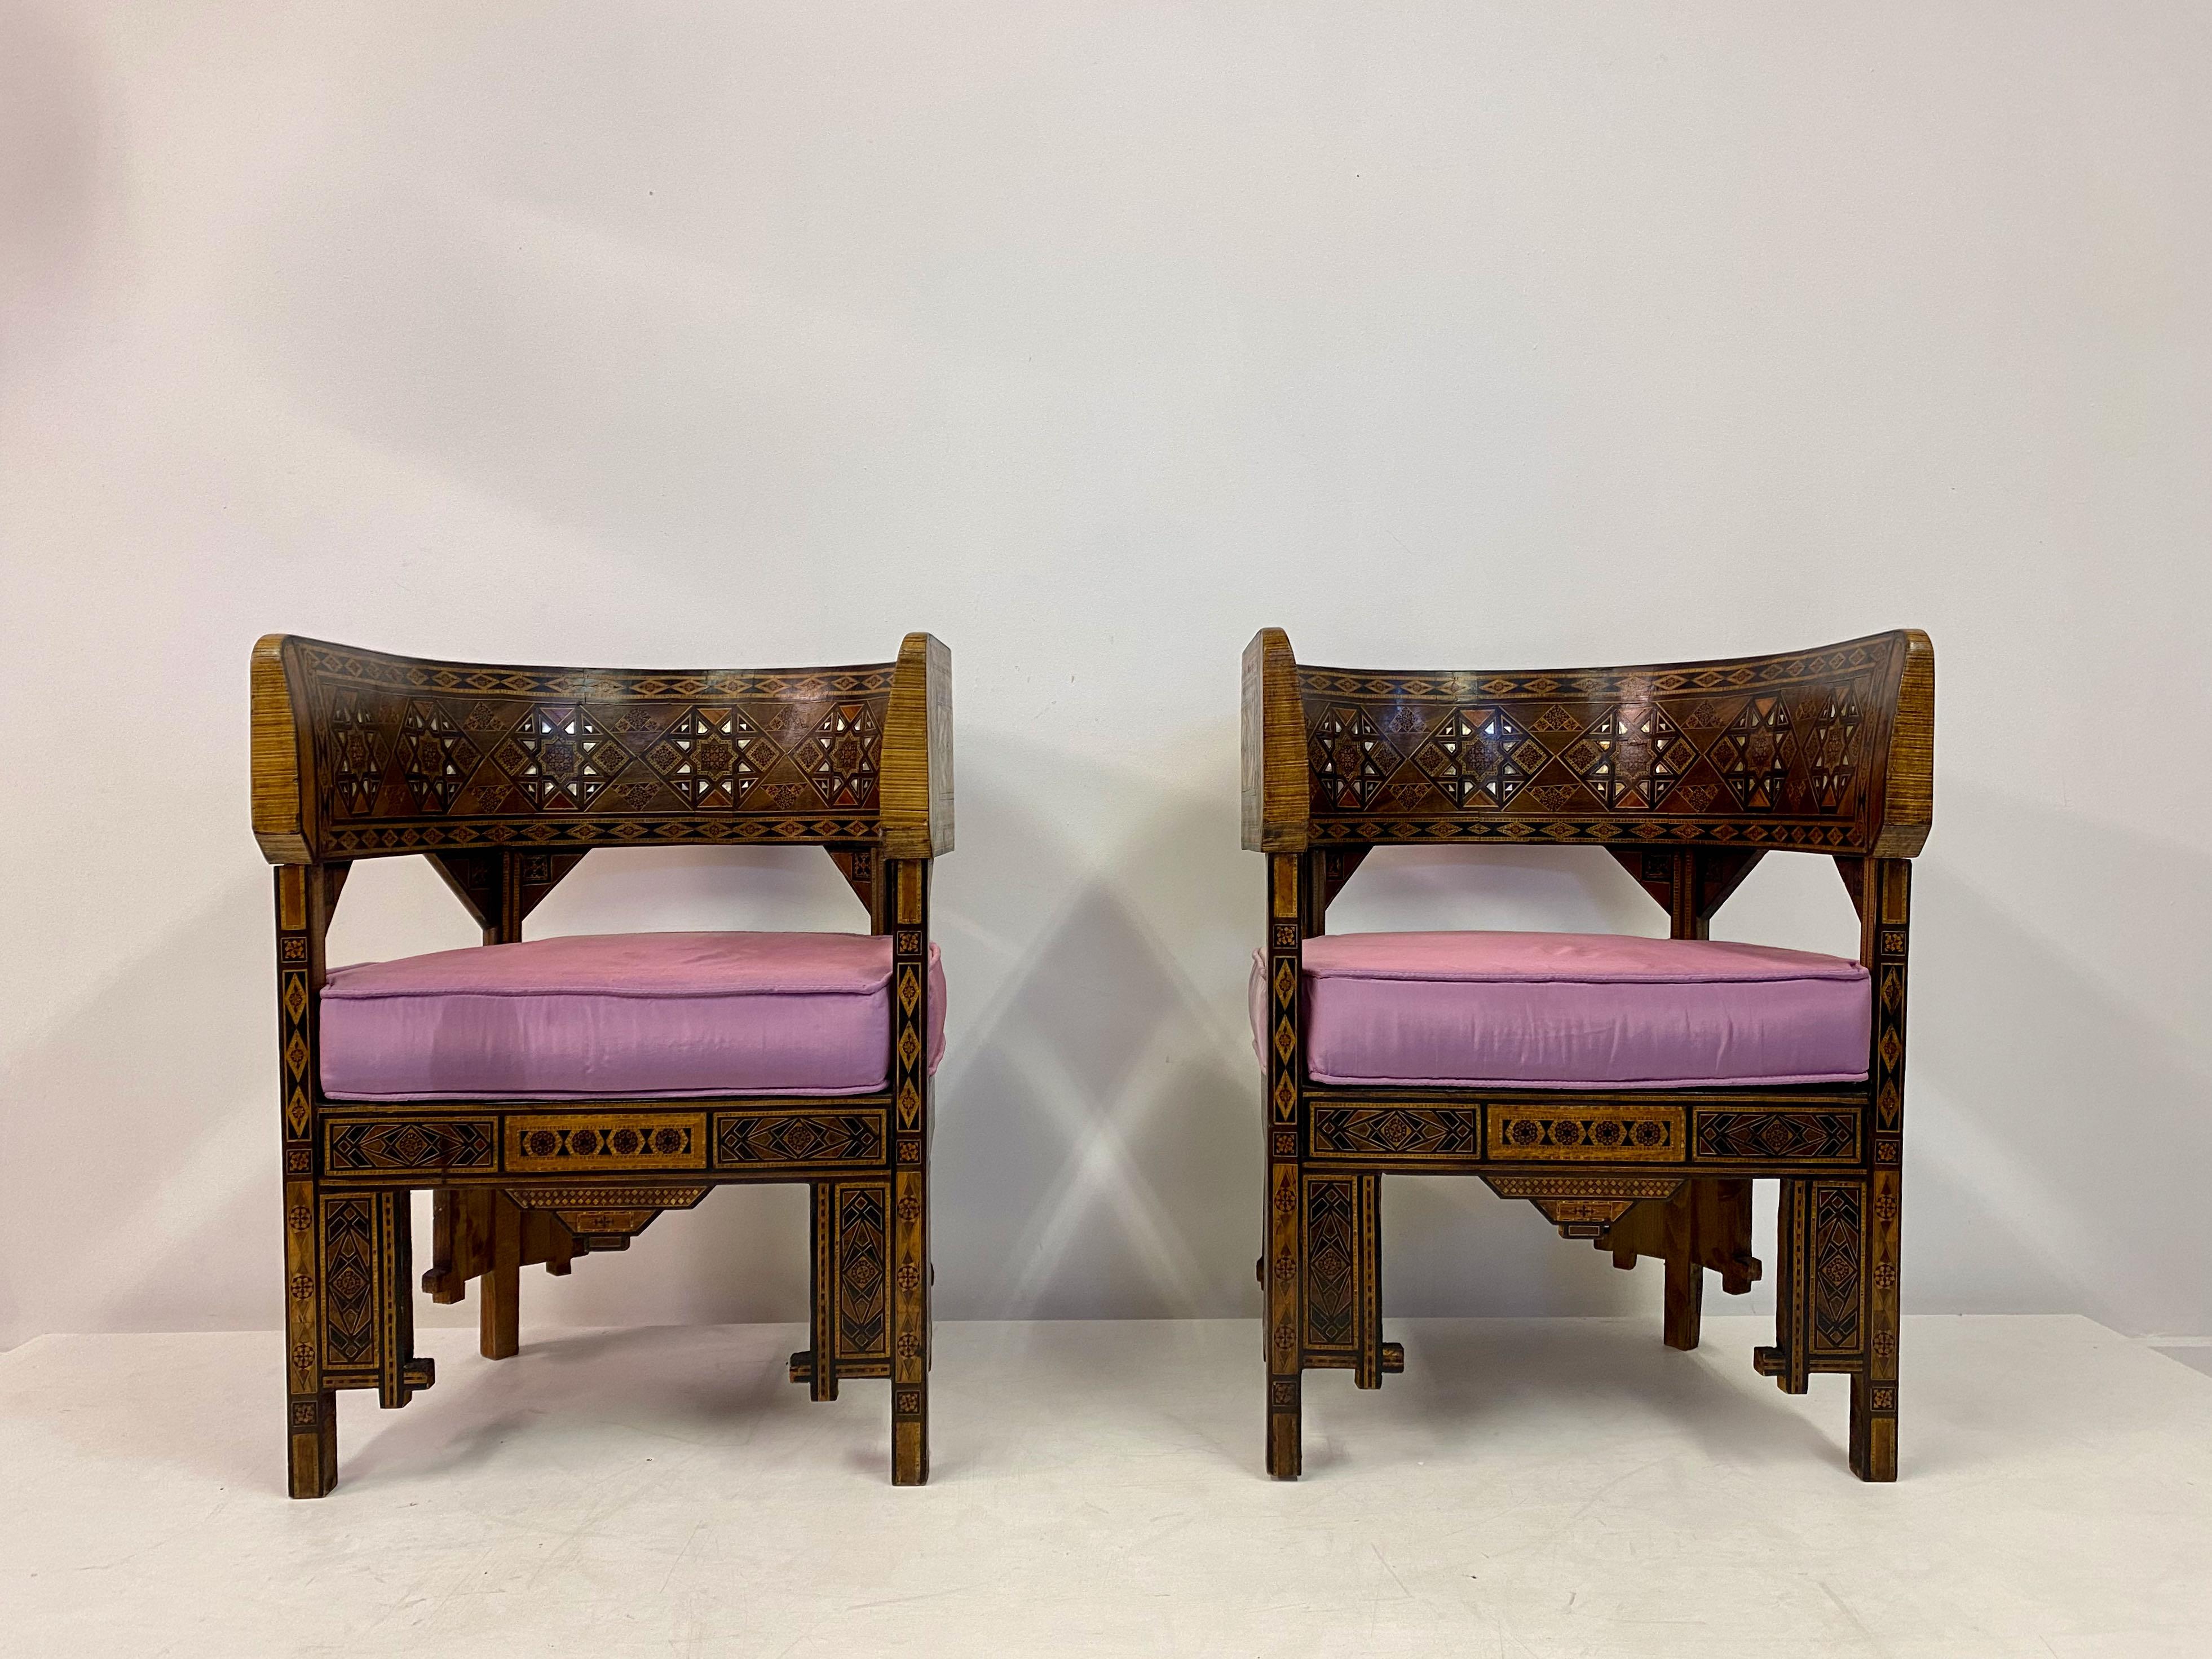 Pair of tub armchairs

Walnut with parquetry

Mother of pearl and fruitwood inlay

Geometric patterns

Silk covered cushions with some marks. 

Can be reupholstered if fabric supplied

Syria late 19th century.